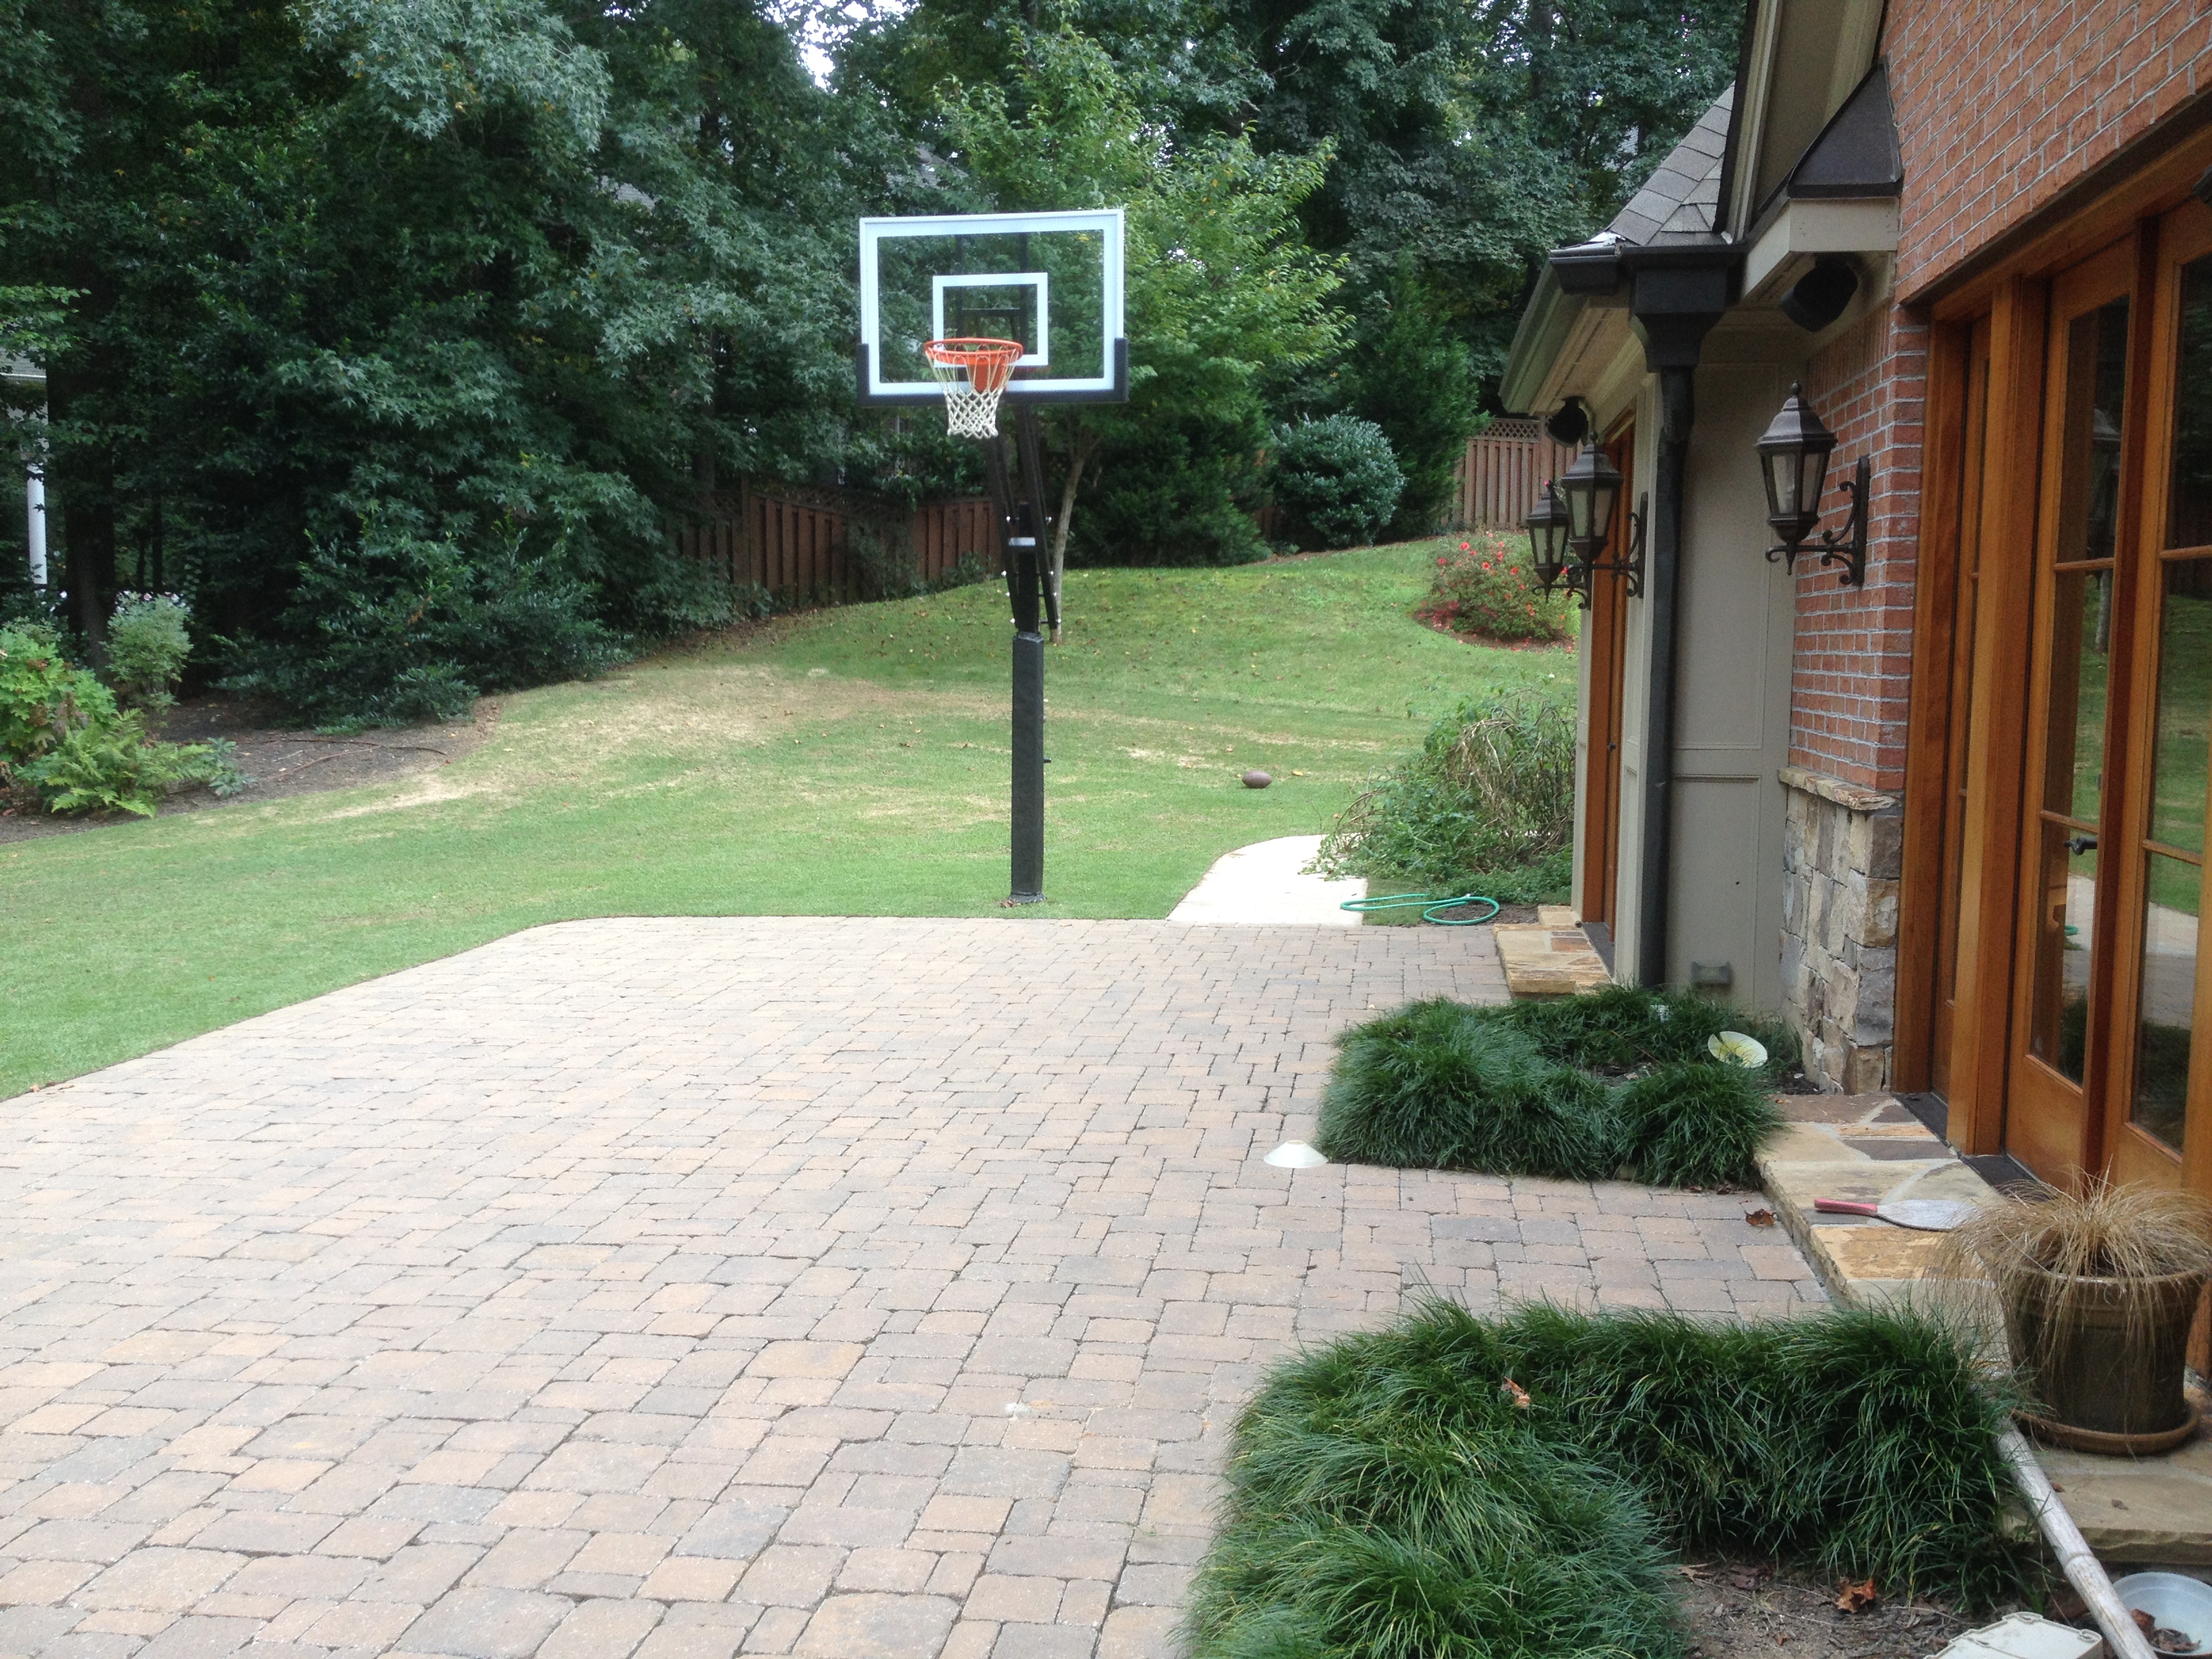 A pro dunk silver basketball system compliments the end of this cobbled brick backyard slab.